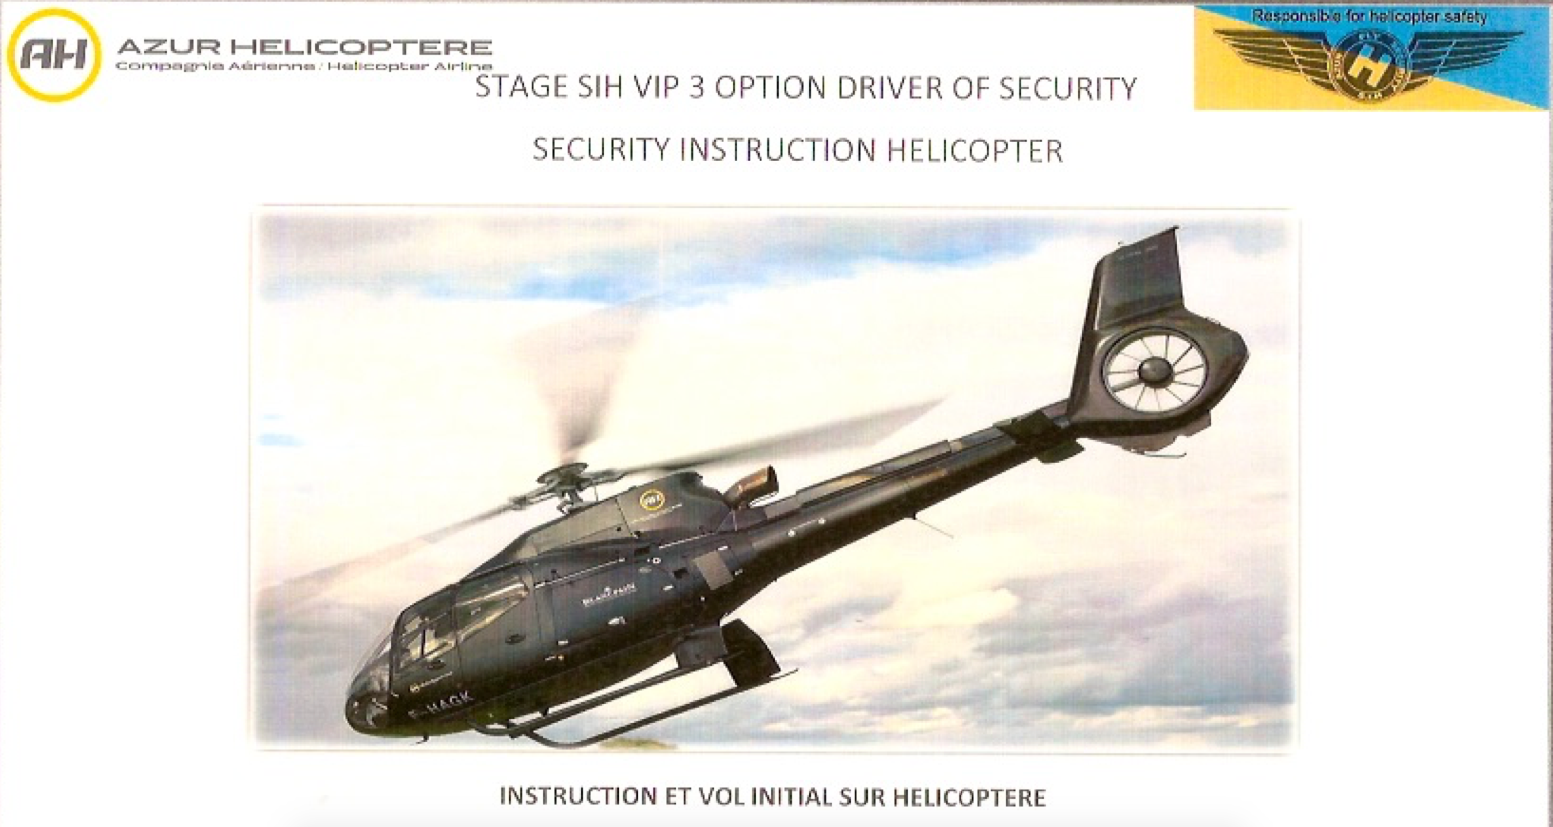 Security Instruction Helicopter